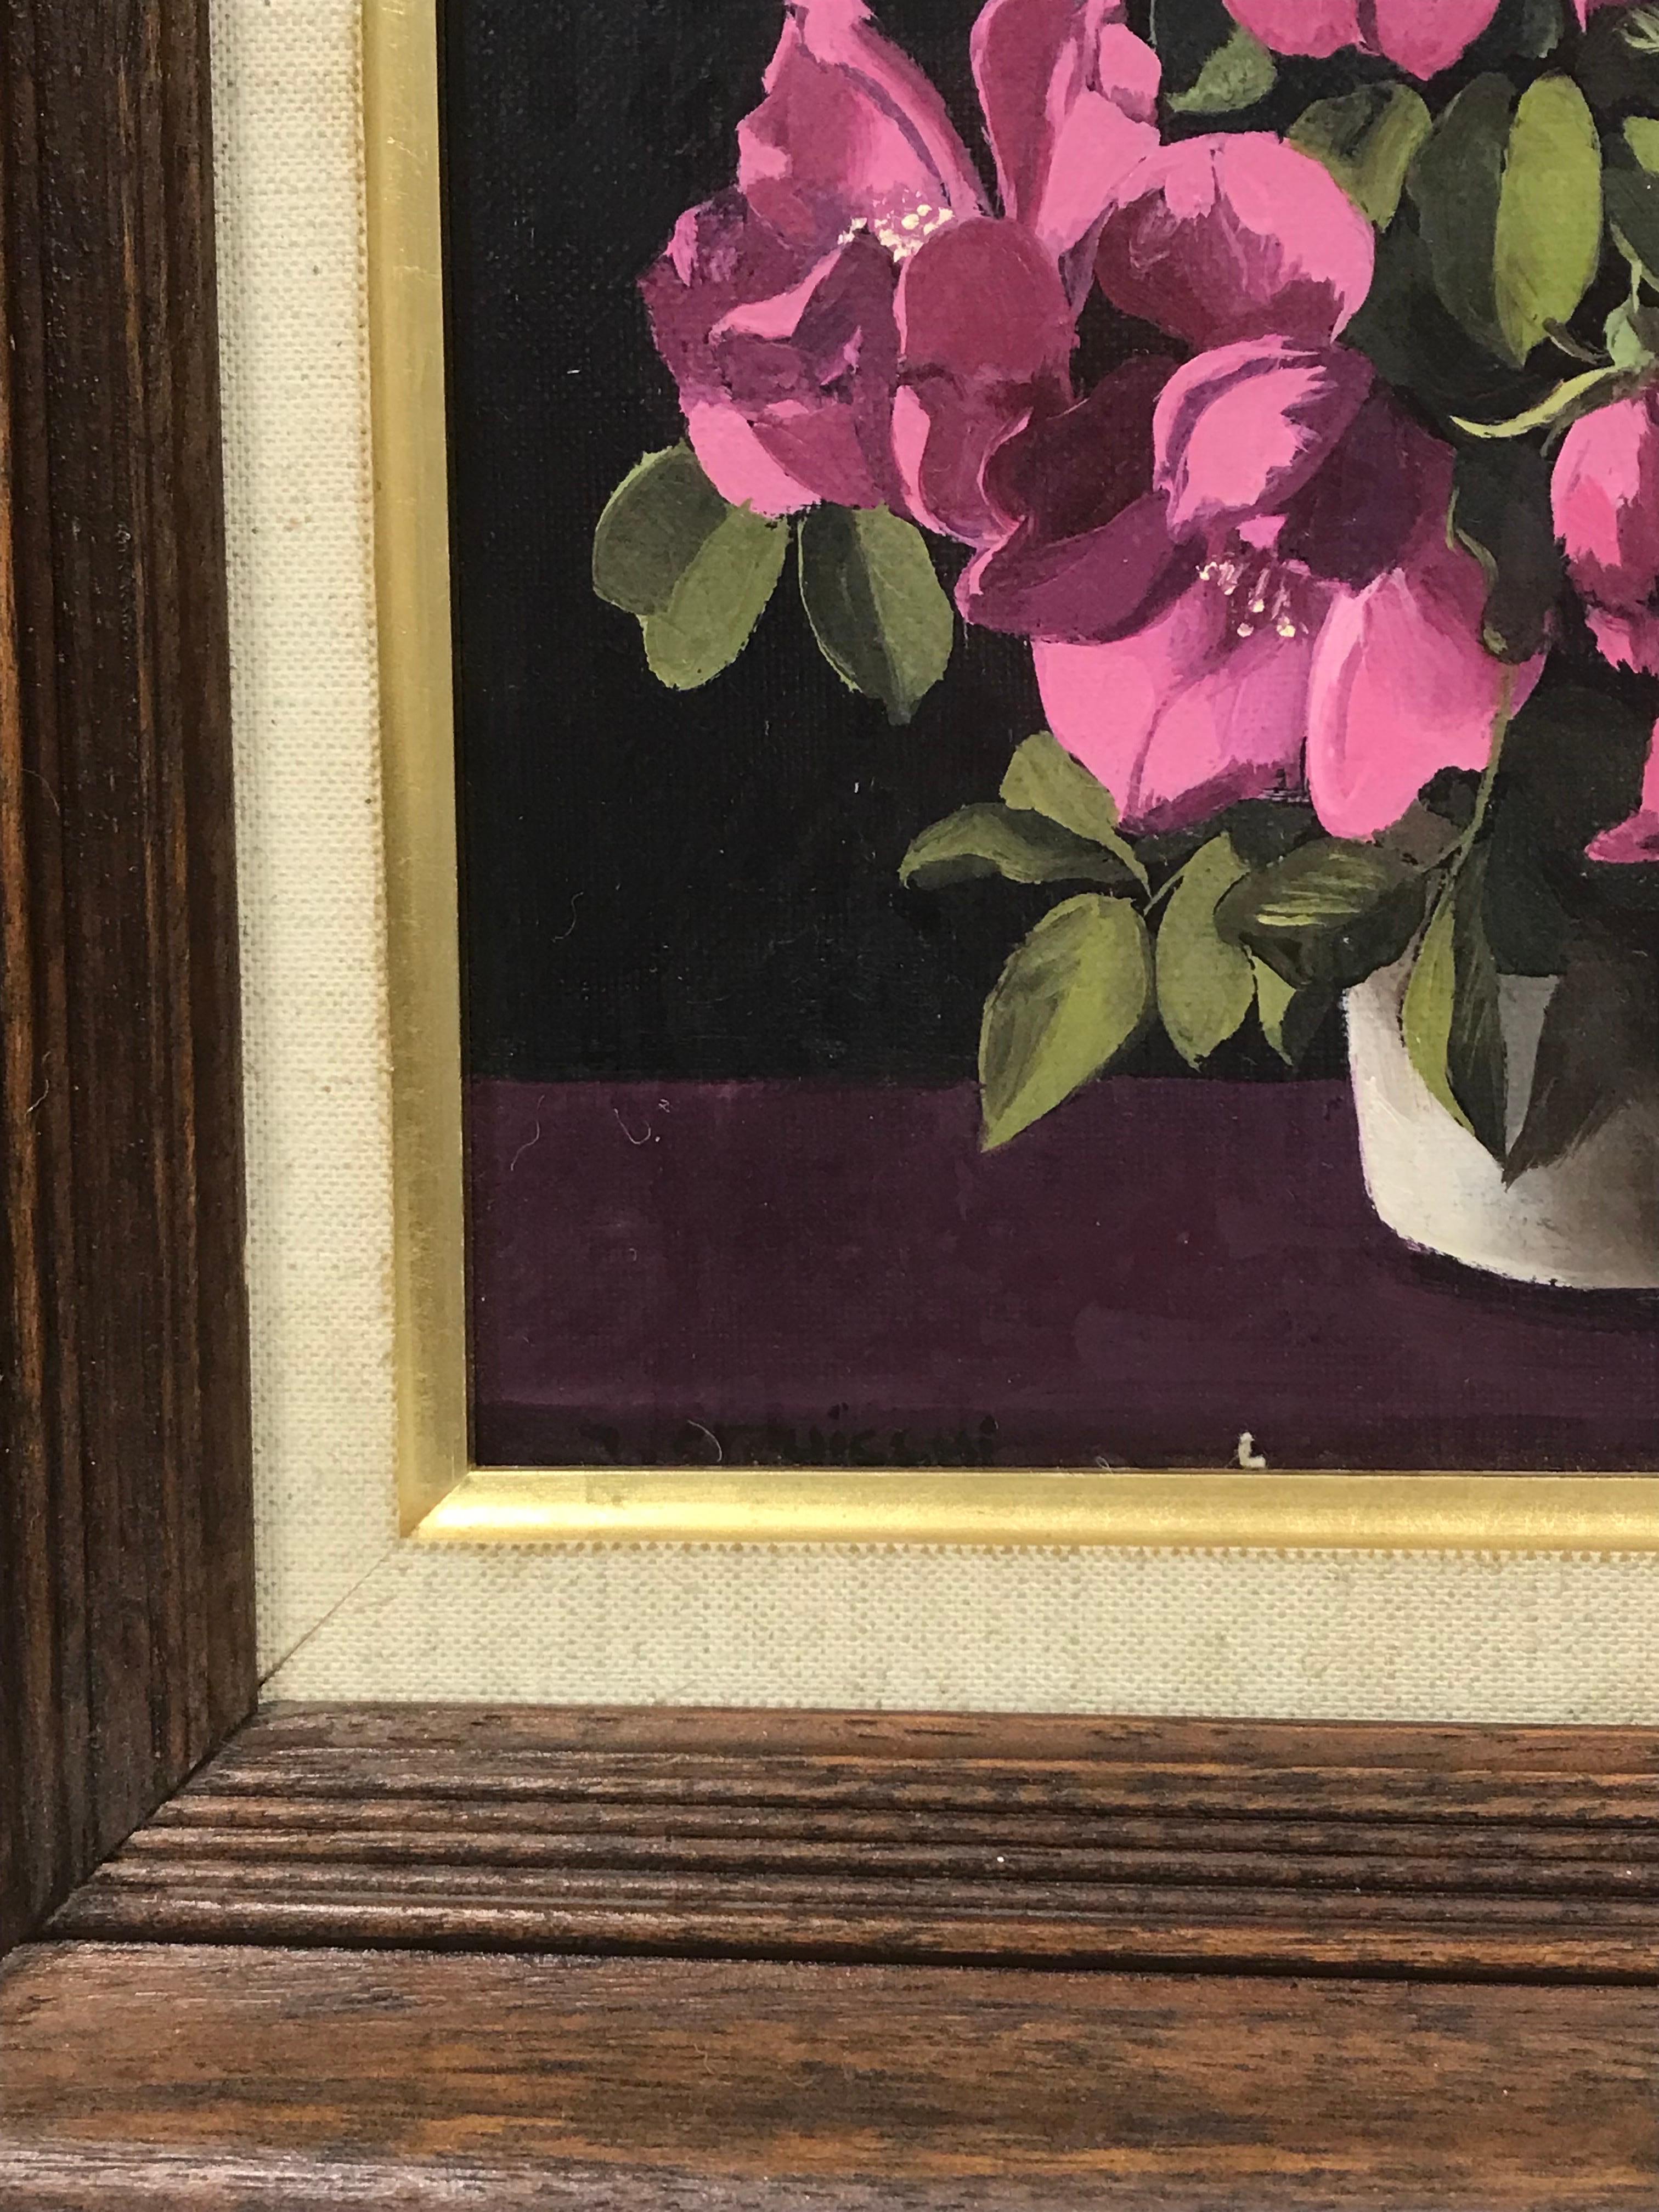 Artist/ School: Italian School, signed lower left, second half 20th century

Title: Lilac/ purple coloured flowers in an interior; their shape and color further enhanced by the darker background. 

Medium: oil painting on canvas, framed